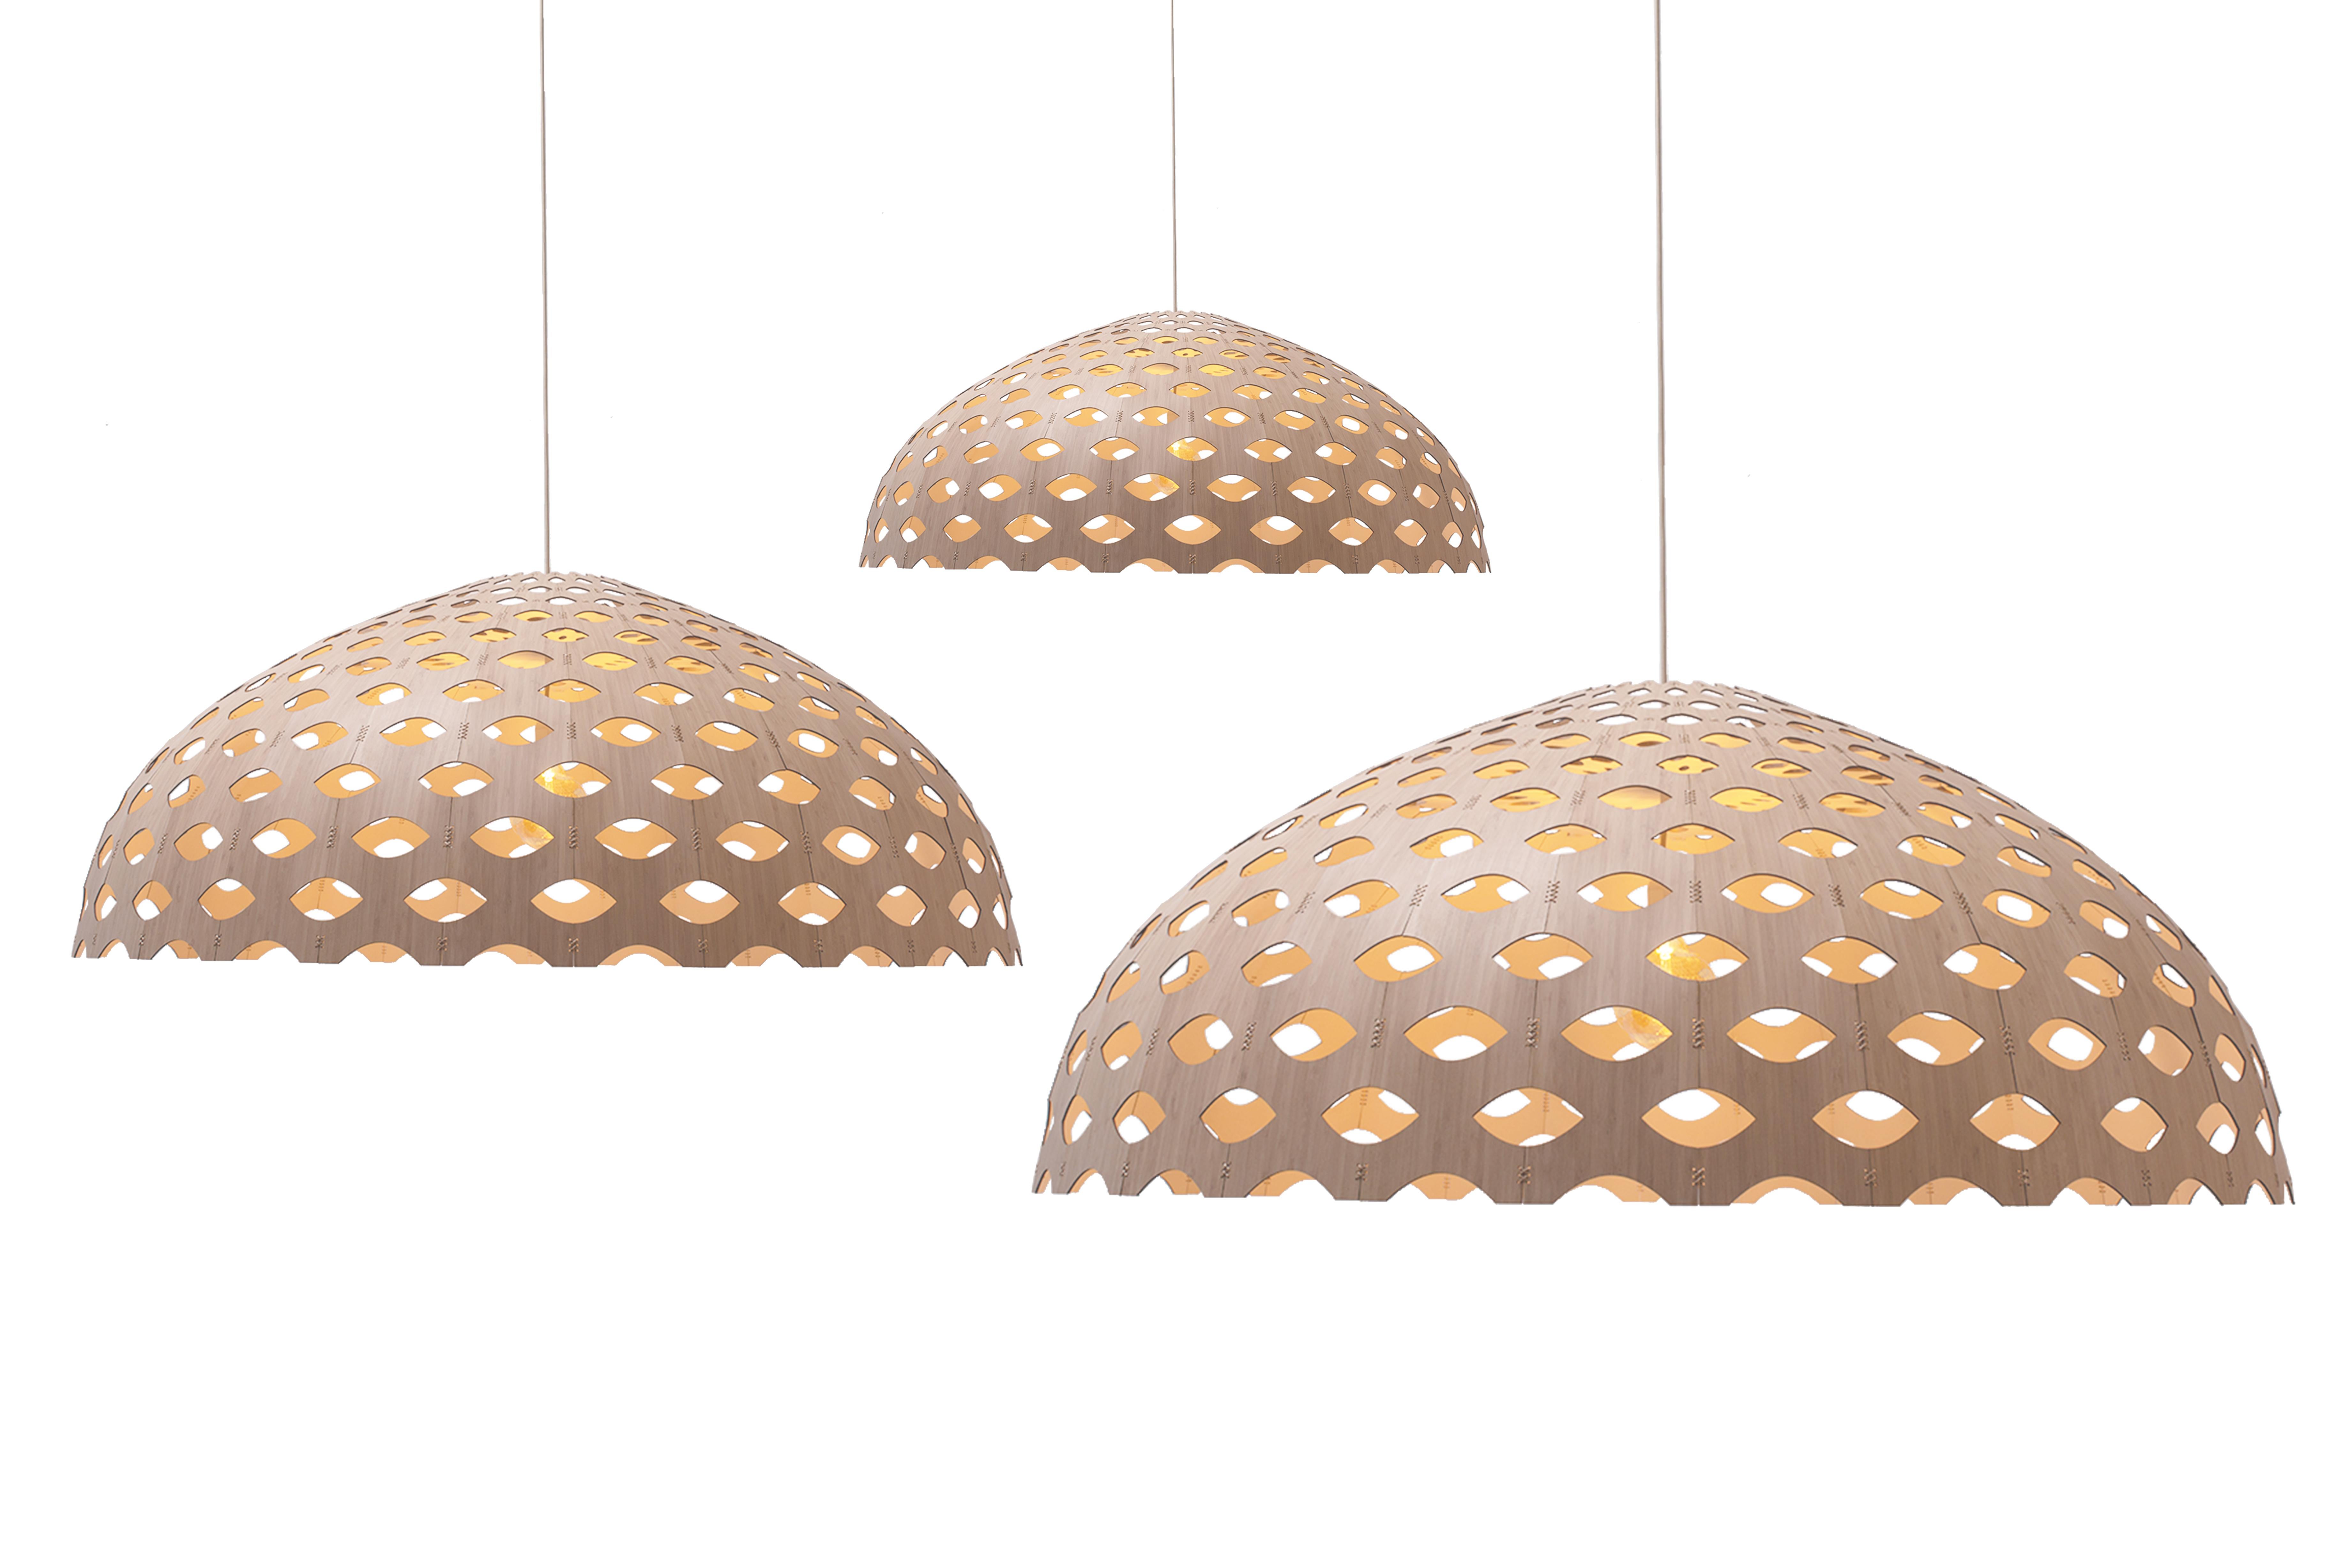 Woodwork Panelitos Dome Lamp X Large by Piegatto For Sale